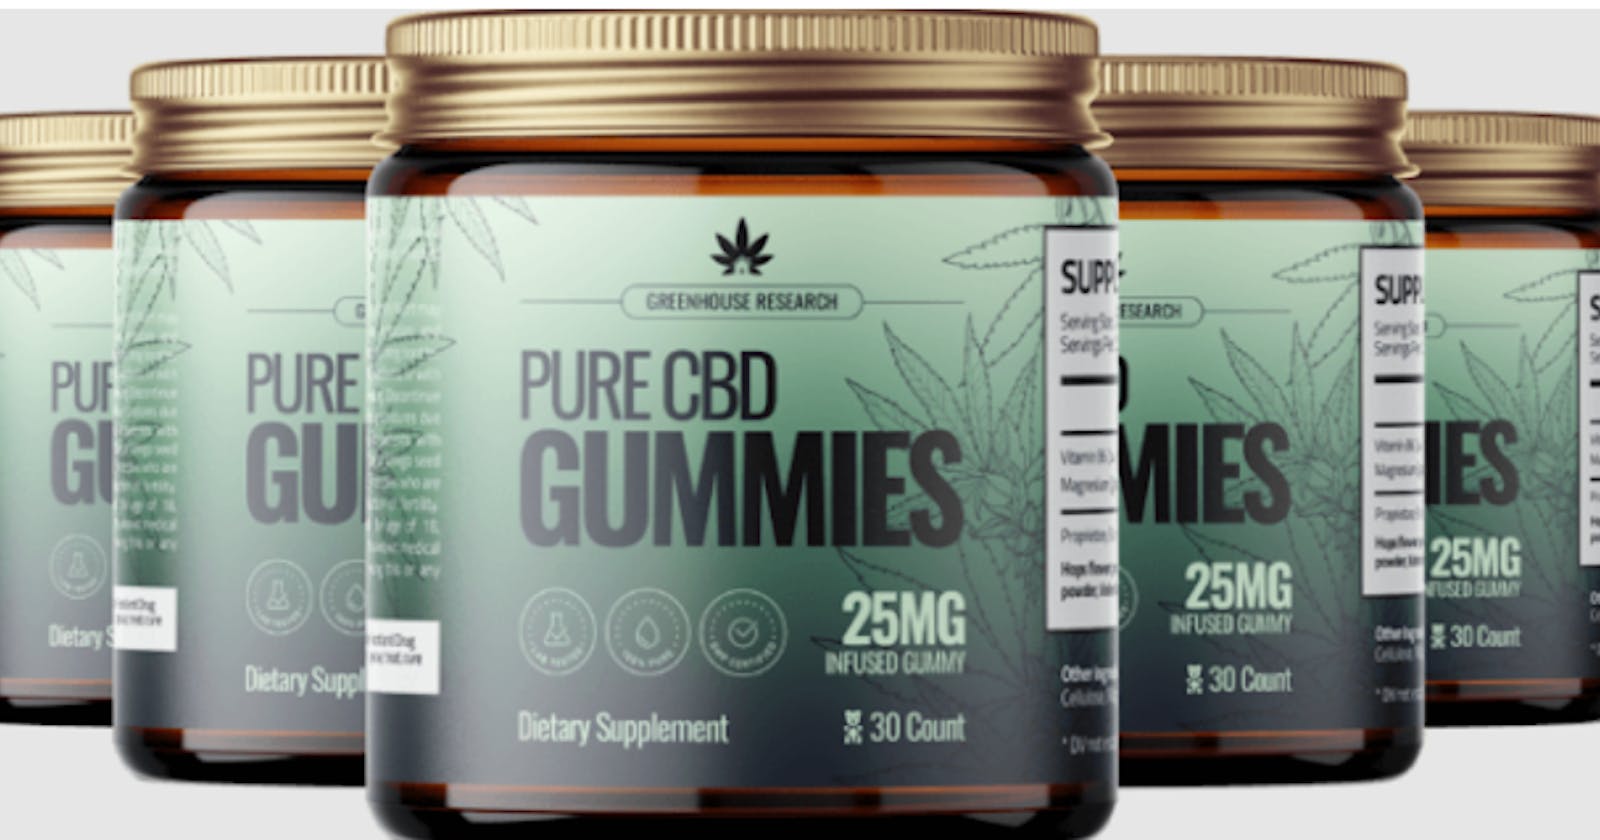 EveryBody CBD Gummies Reviews - EXCLUSIVE OFFER?